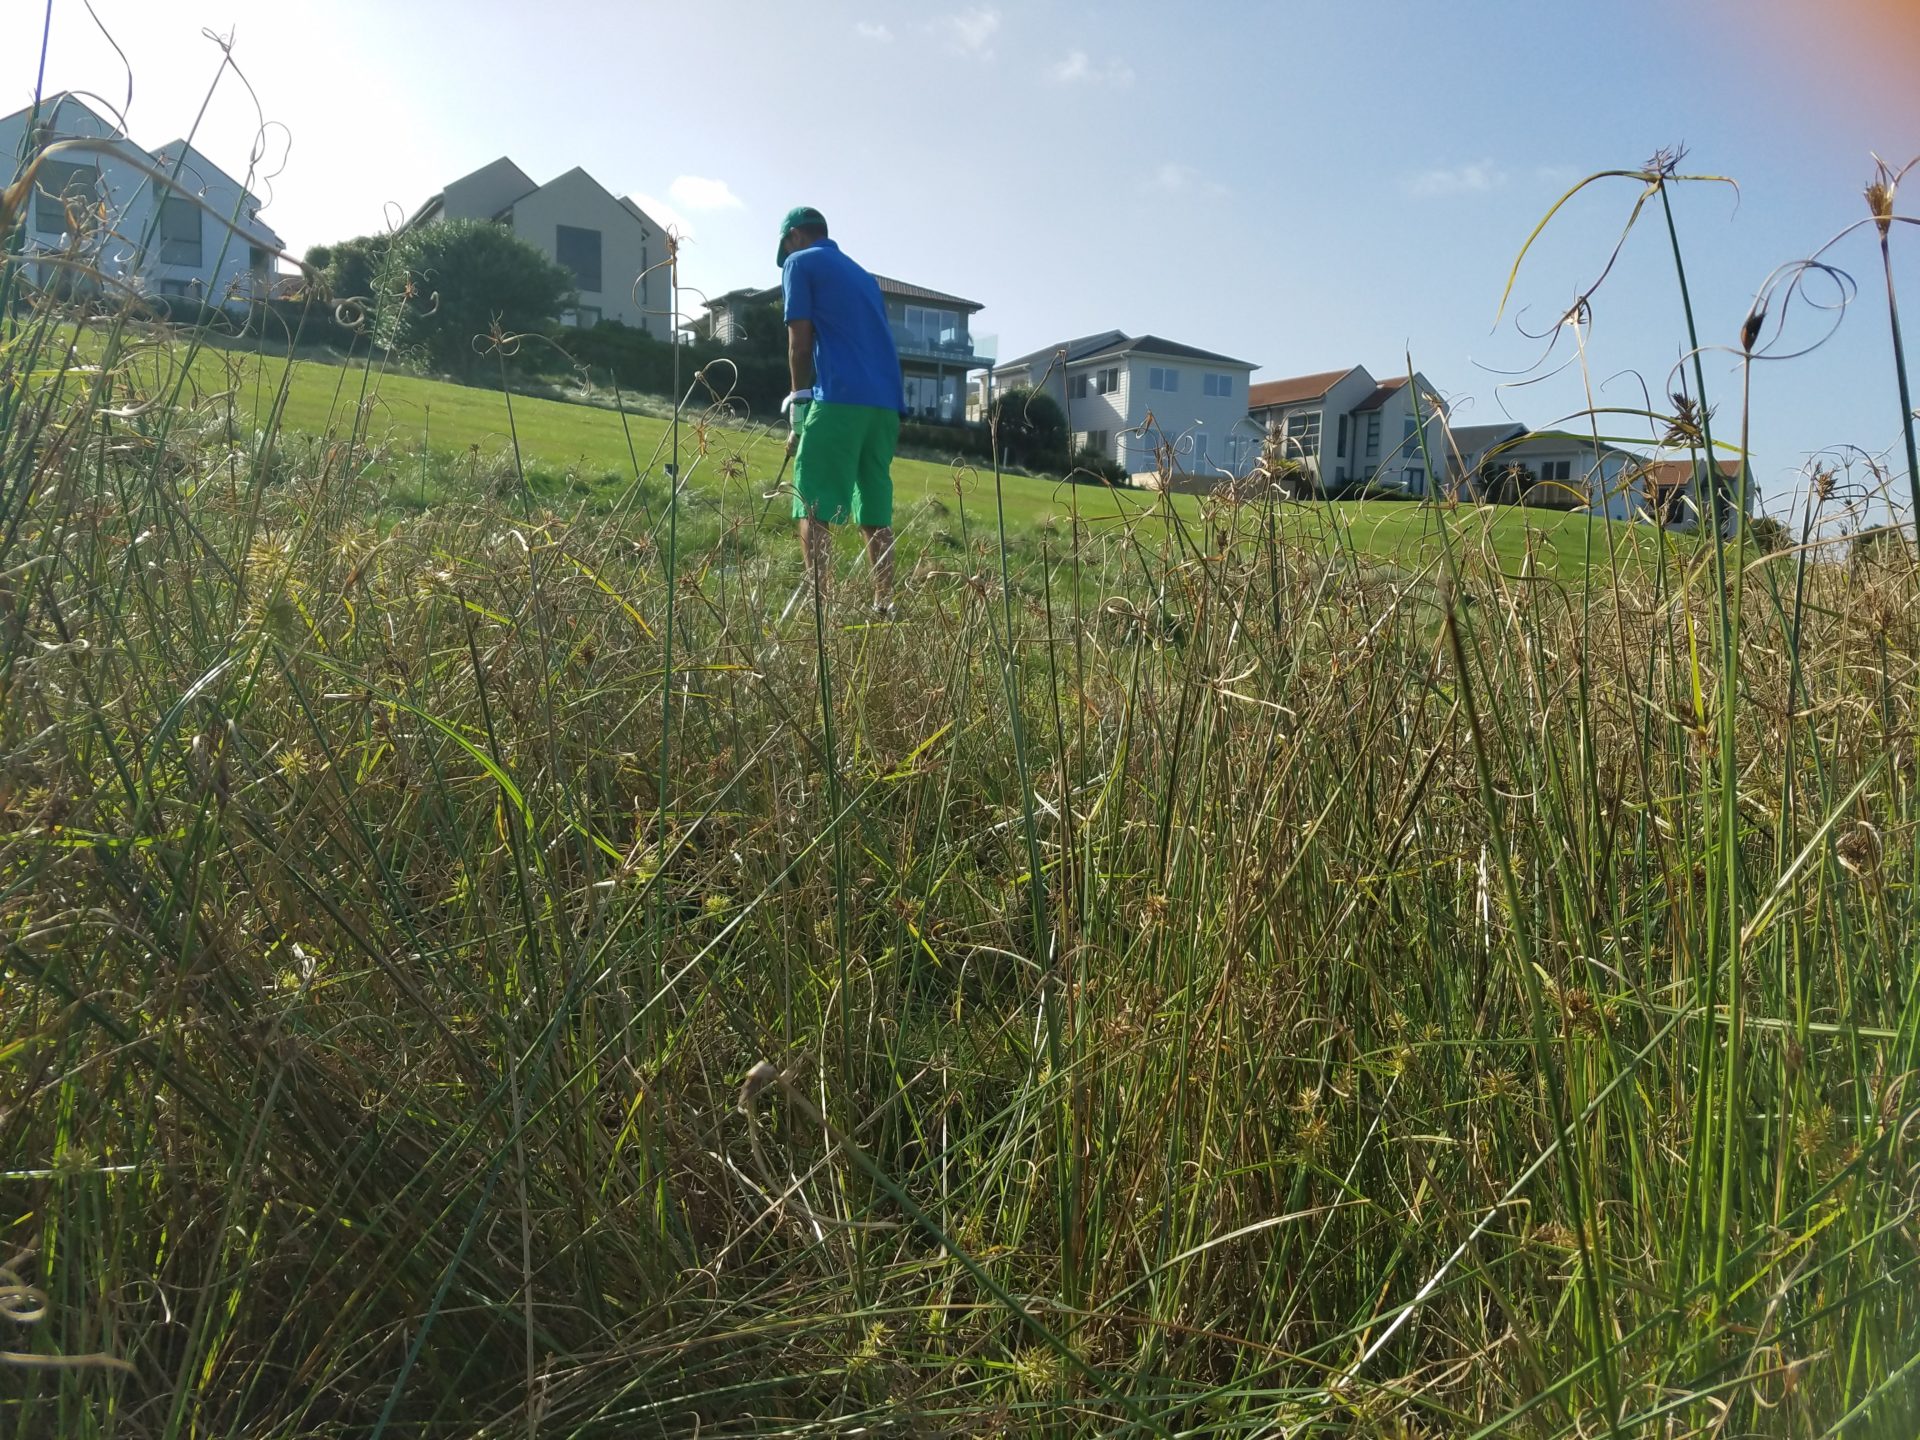 a man standing in a grassy field